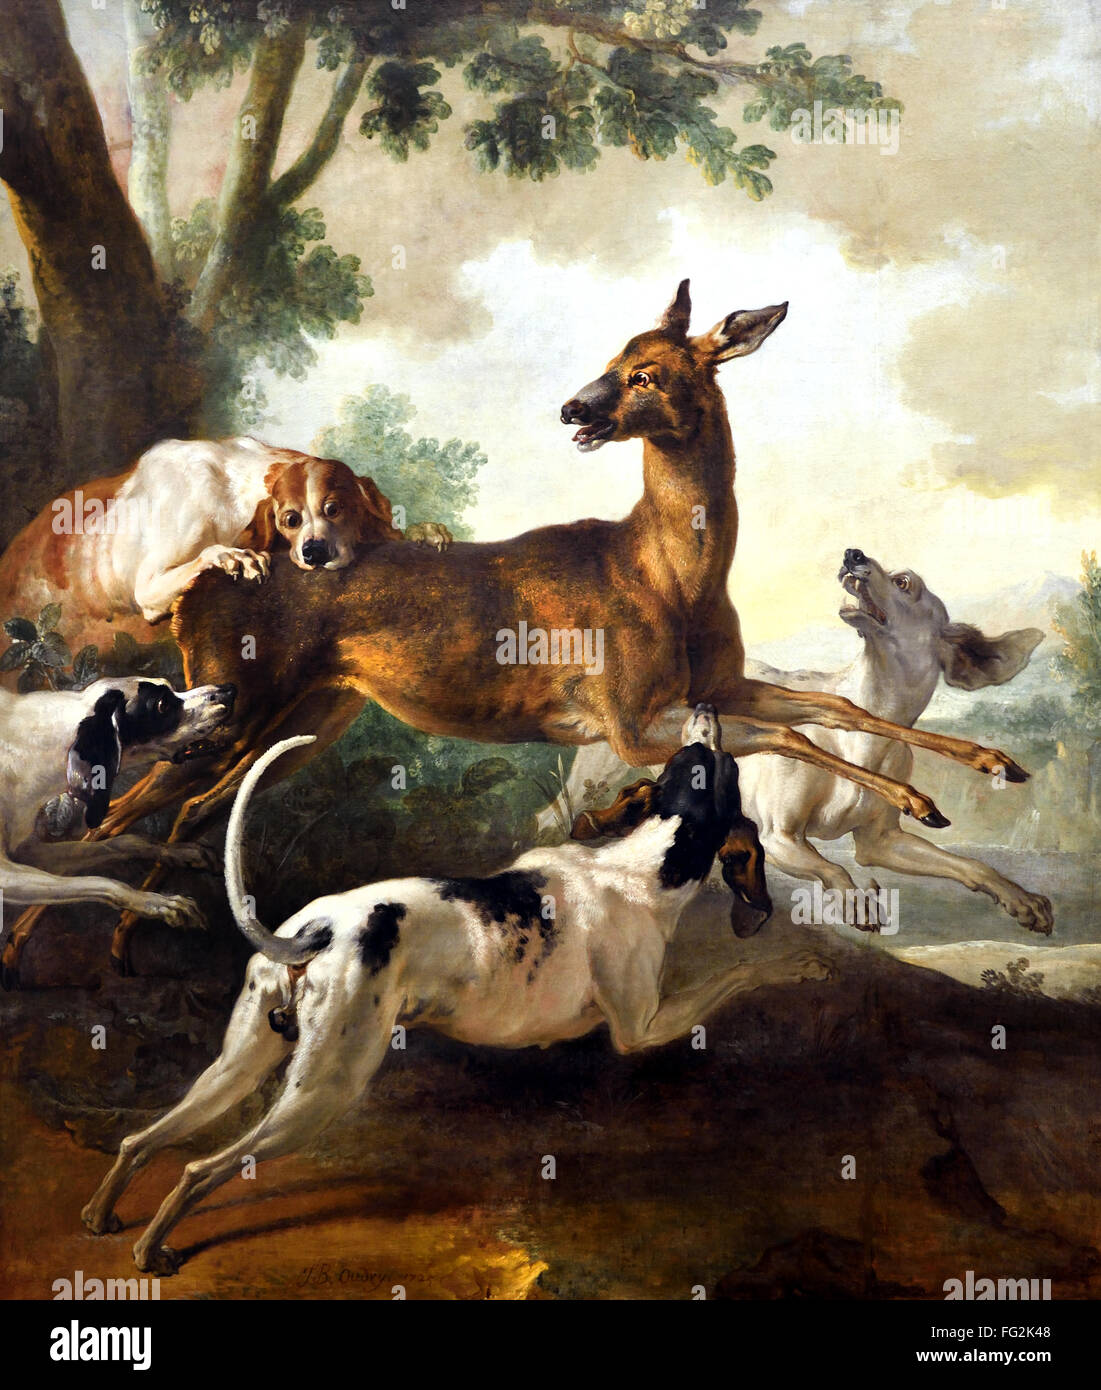 ROE HUNT OR ROE AT BAY 1725 JEAN BAPTISTE OUDRY (1686 - 1755) France French Stock Photo